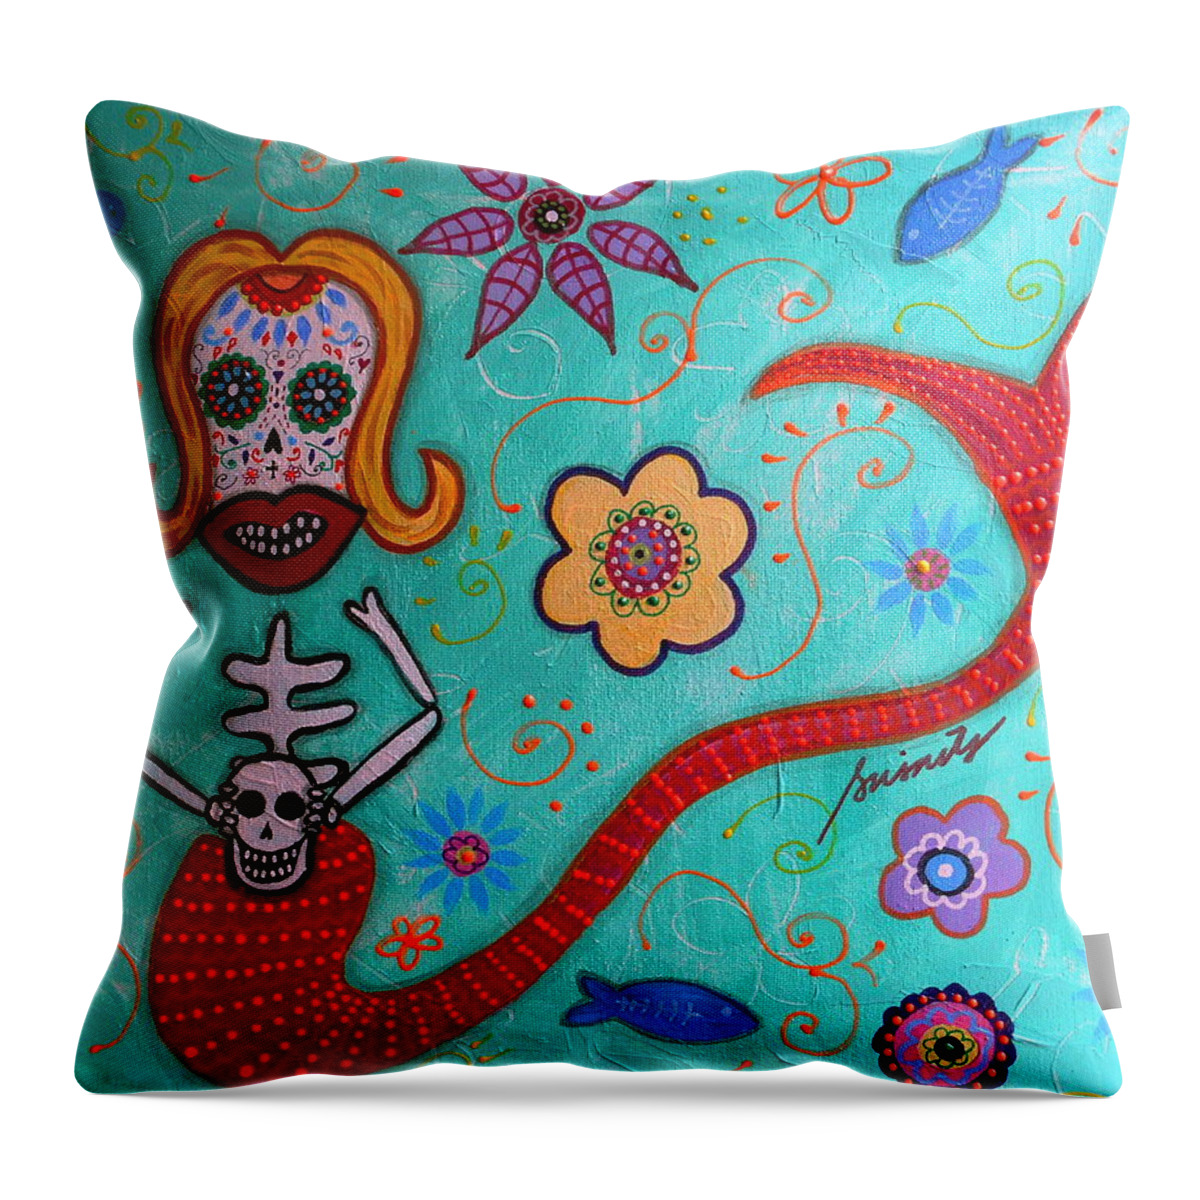 Mermaid Throw Pillow featuring the painting Day Of The Dead Mermaid #2 by Pristine Cartera Turkus